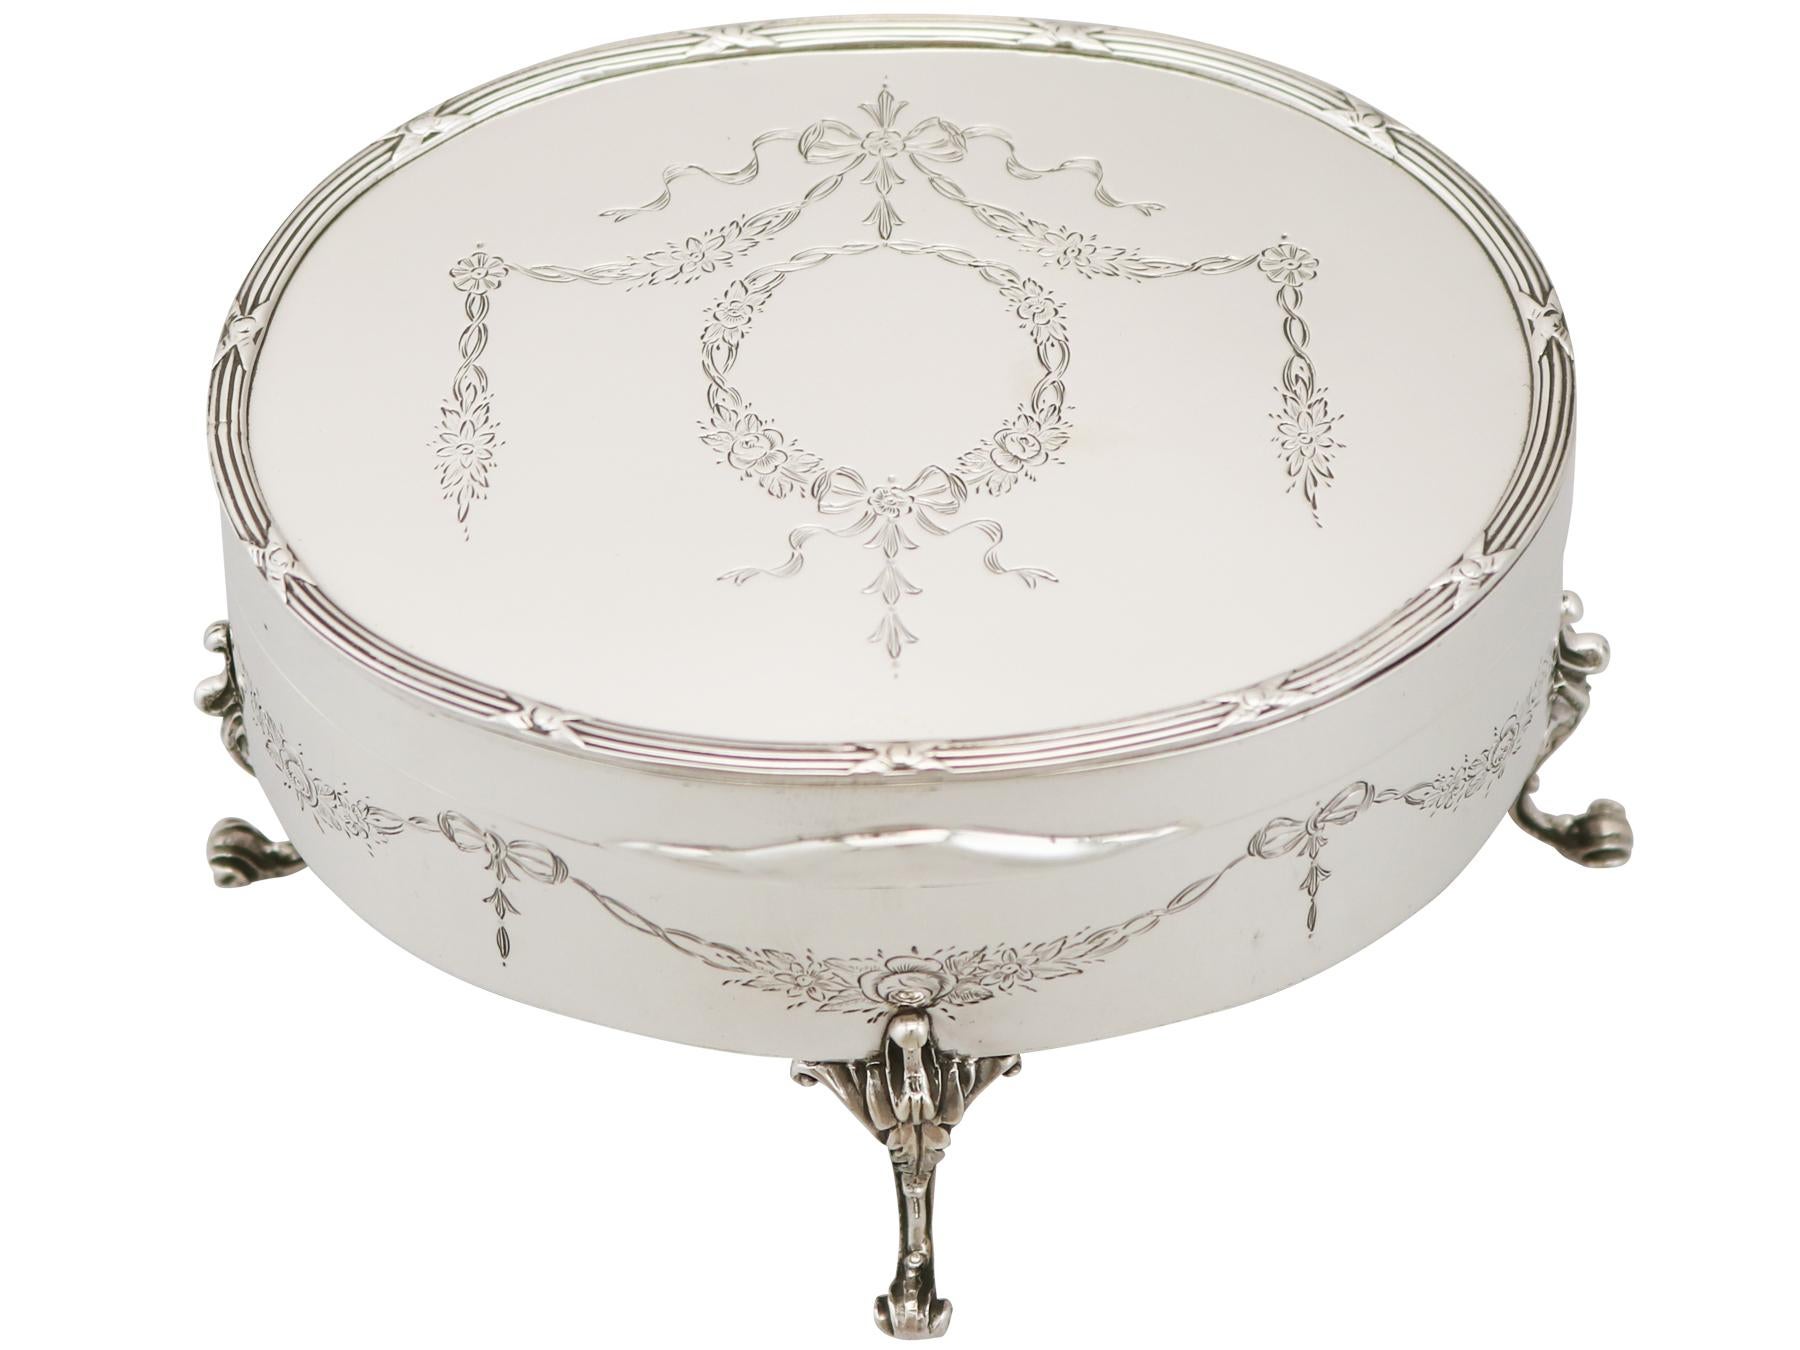 An exceptional, fine and impressive antique Edwardian English sterling silver jewellery / trinket box; an addition to our ornamental silverware collection.

This exceptional antique Edwardian sterling silver jewellery box has an oval form.

The